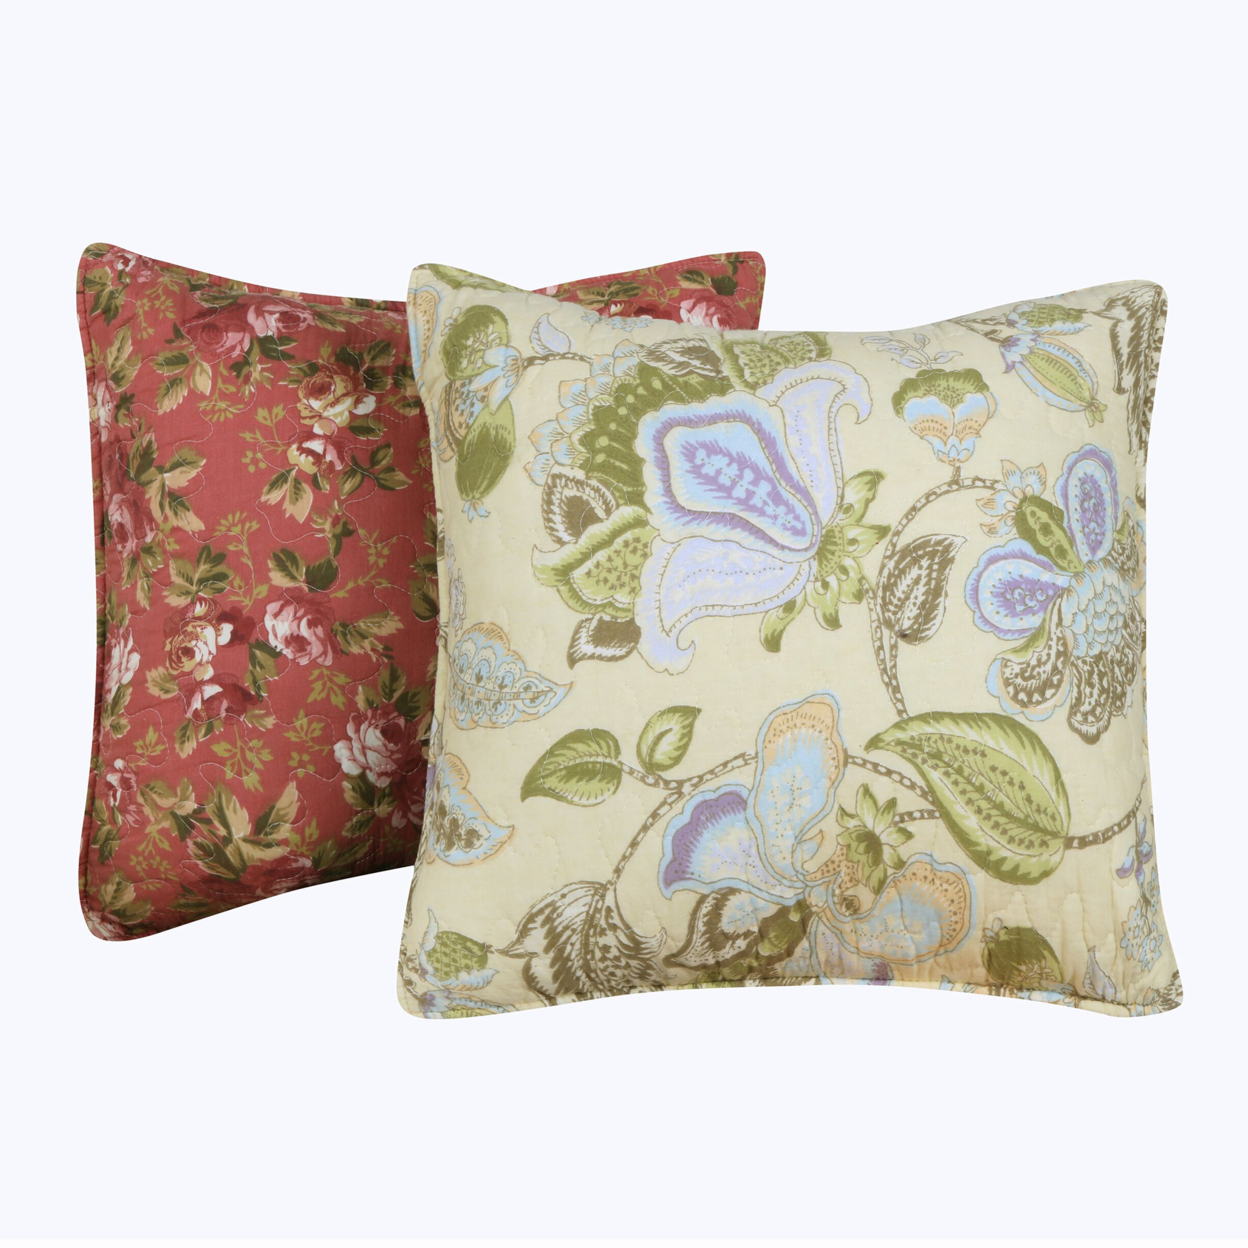 Eiger Fabric Decorative Pillow With Floral Prints, Set Of 2, Multicolor- Saltoro Sherpi